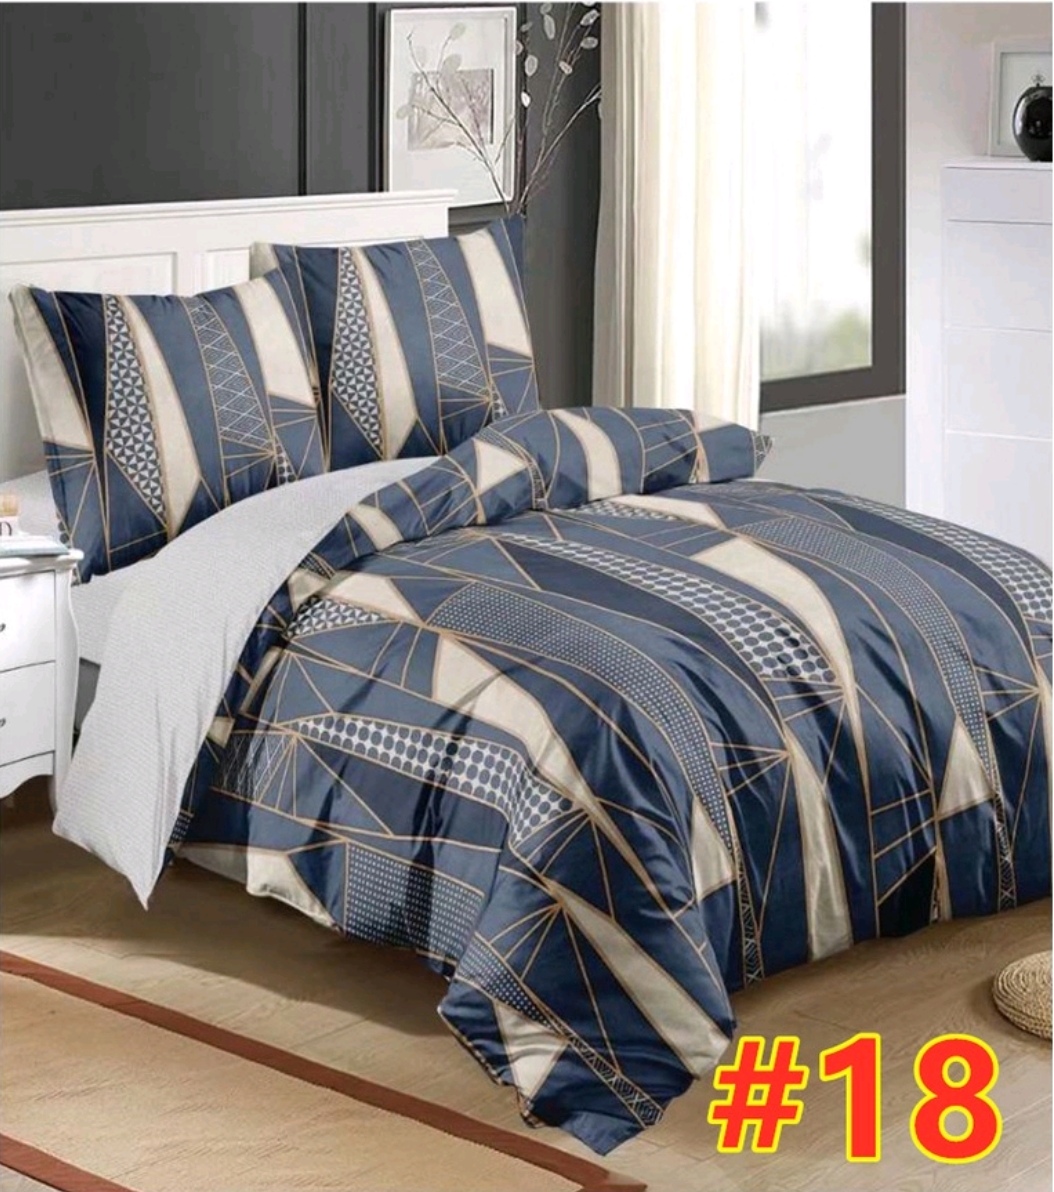 King size (4 IN1) Bedsheet Cotton Fitted Bedsheet Premium Quality with 800 Thread Counts